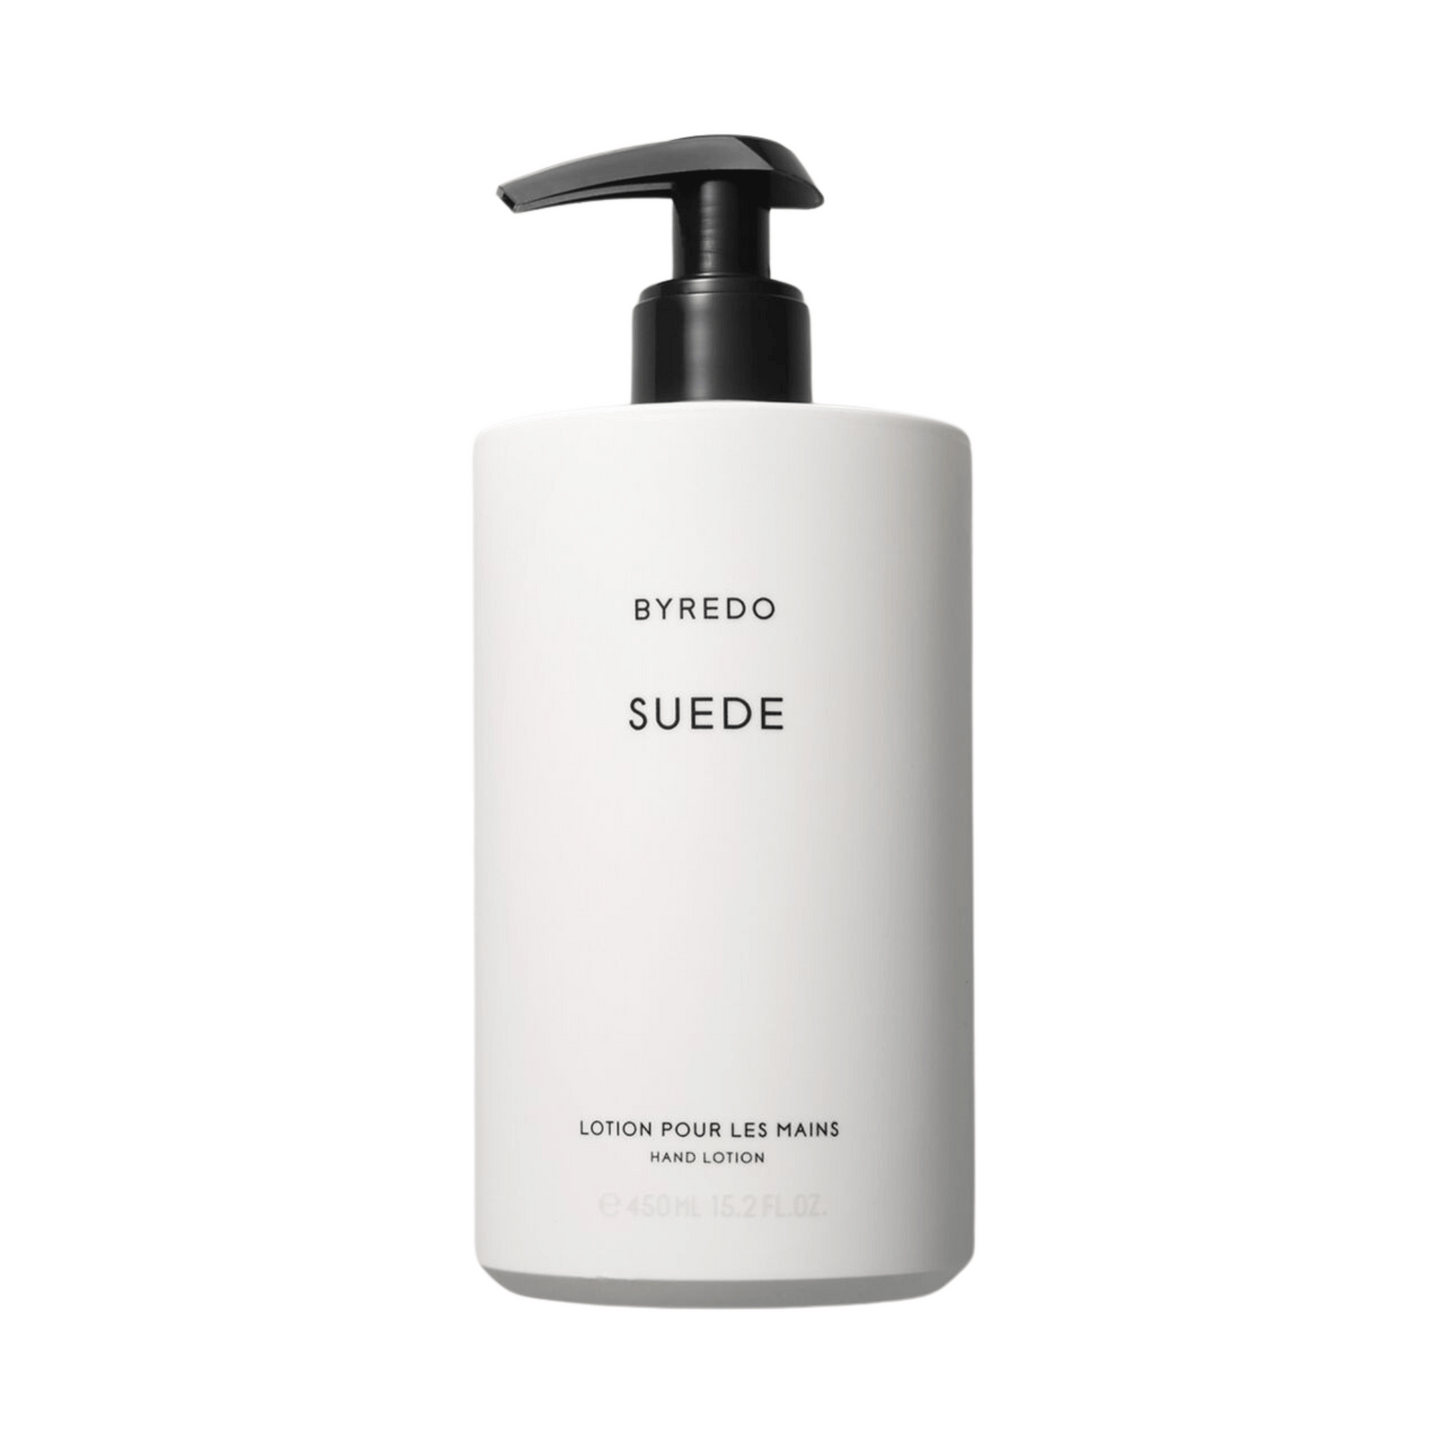 Primary Image of Suede Hand Lotion